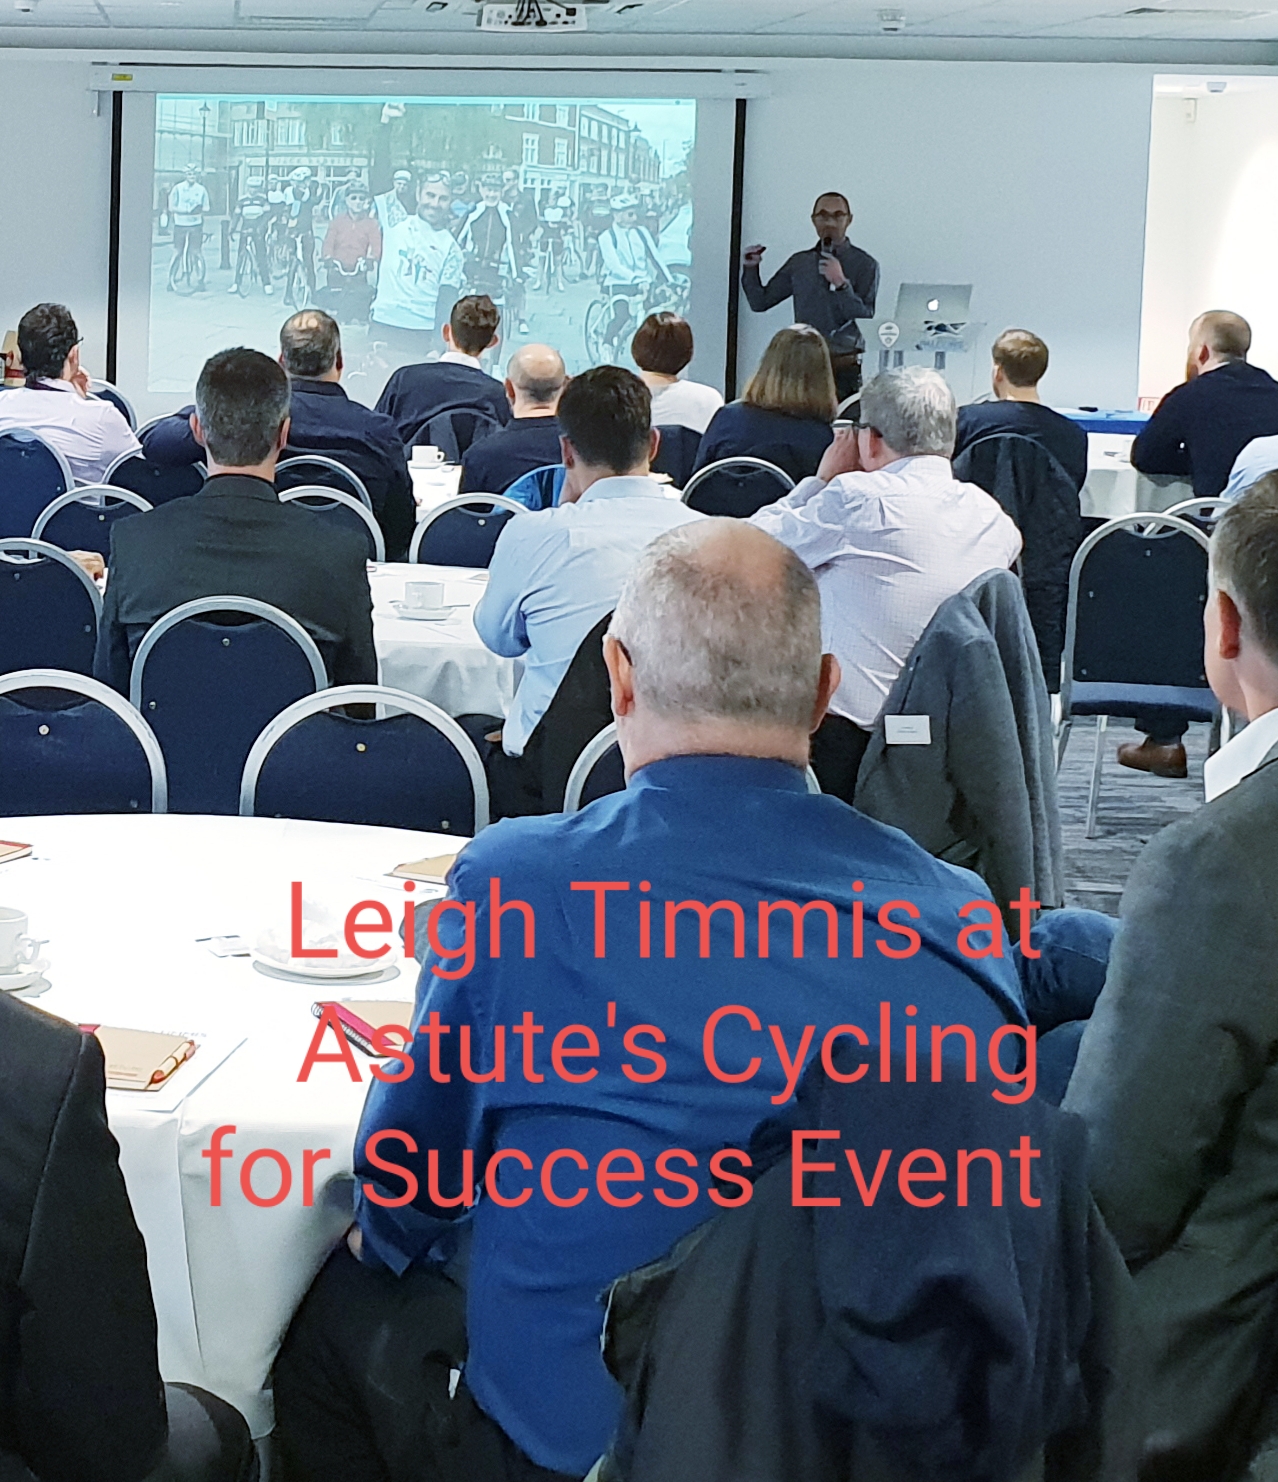 Brilliant Feedback and more from our successful ‘Cycling for Success’ Business Breakfast with Leigh Timmis – Thanks to everyone who came!